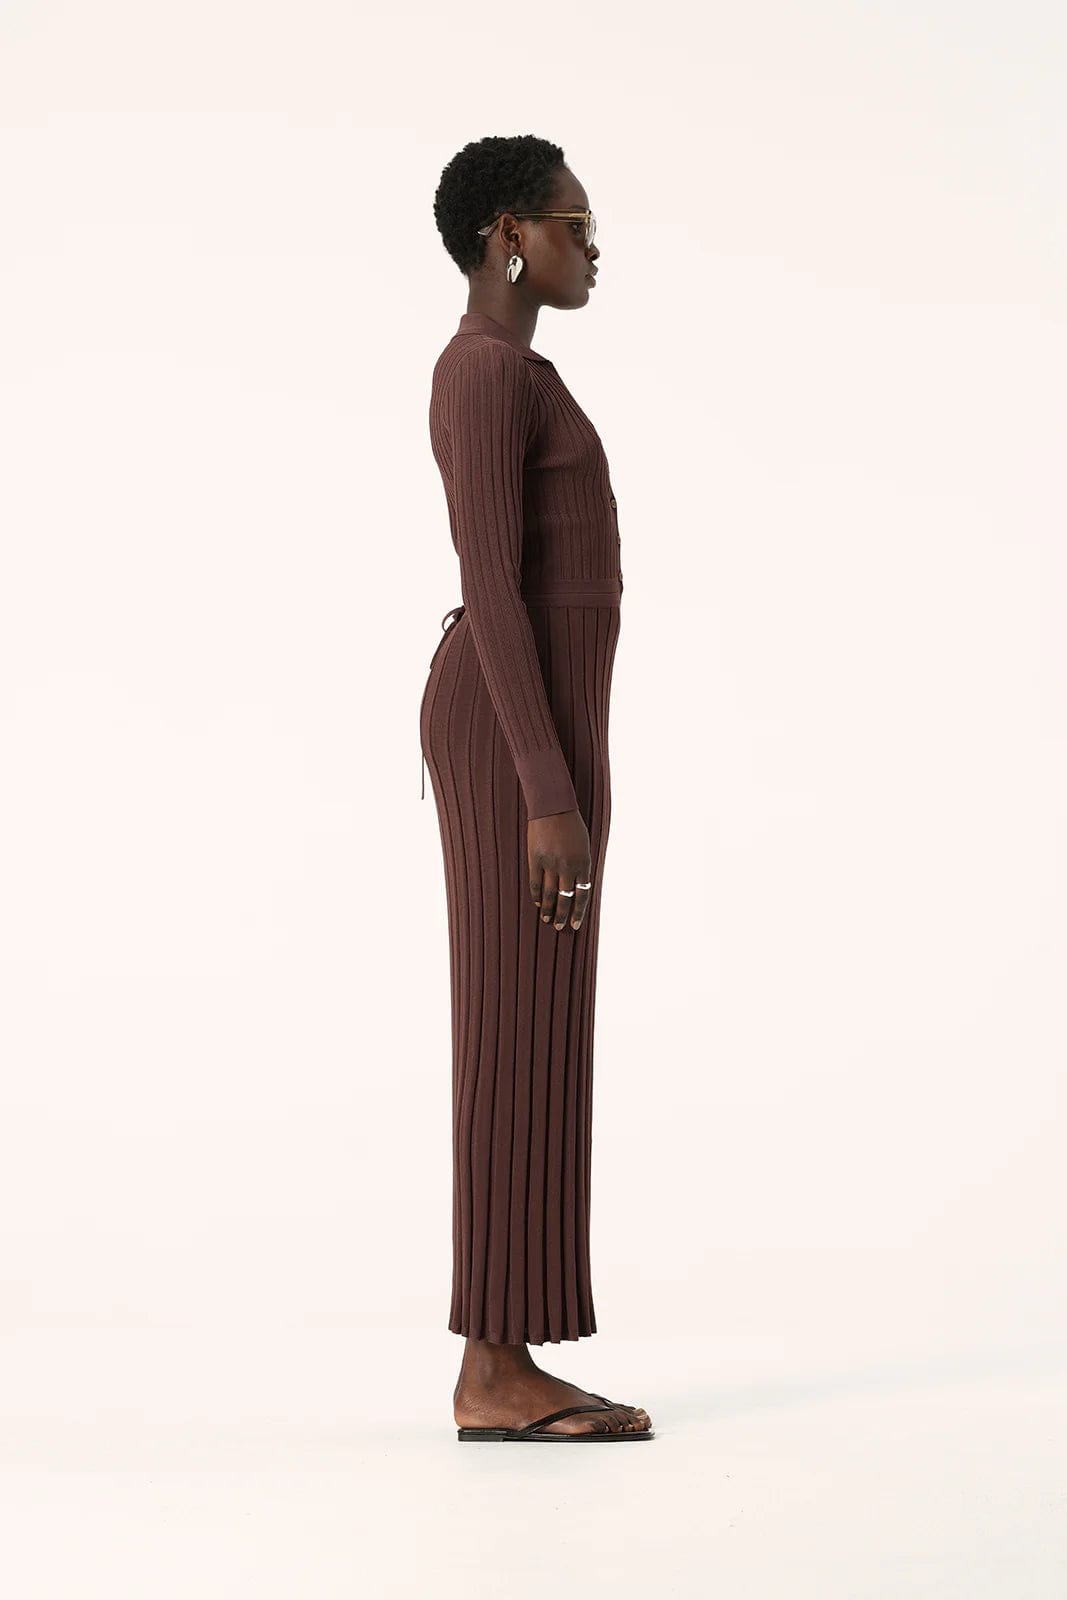 Elka Collective Dresses - Rib Elka Collective | Almo Knit Dress - Chocolate